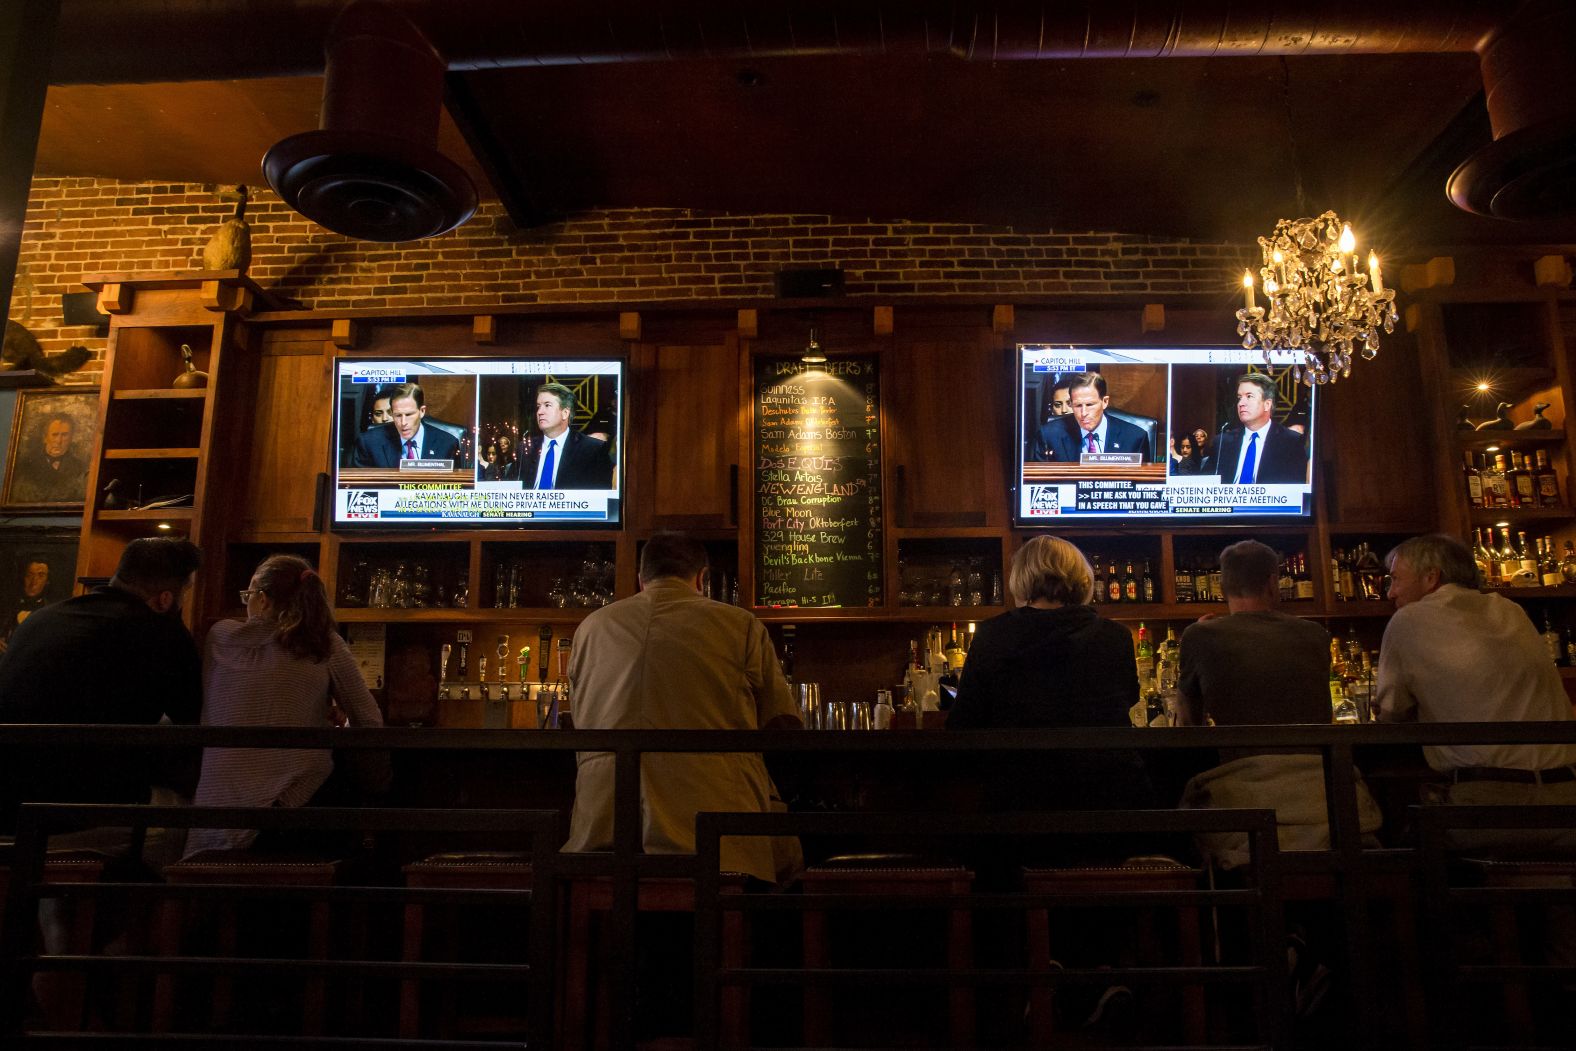 People watch the hearing at a bar in Washington.